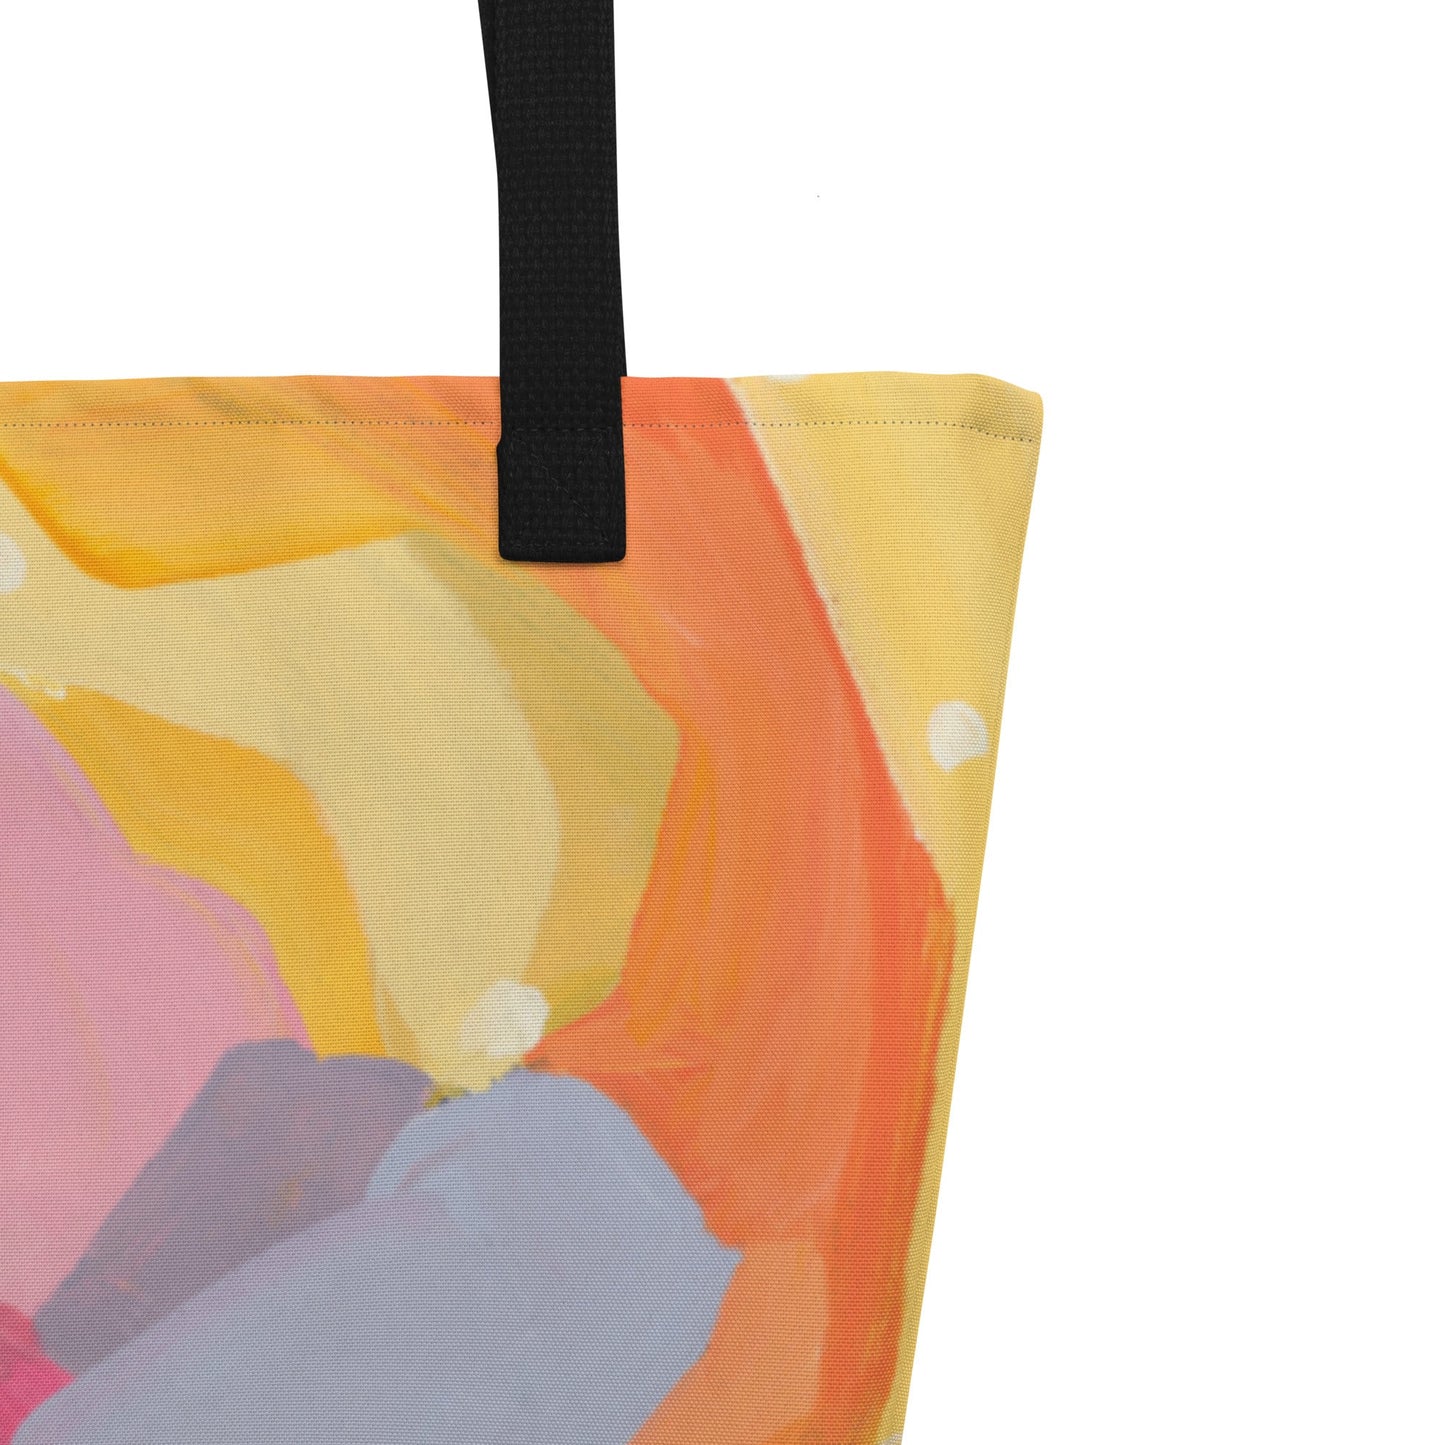 Perfect Day at the Beach - Large Tote Bag - Milpali